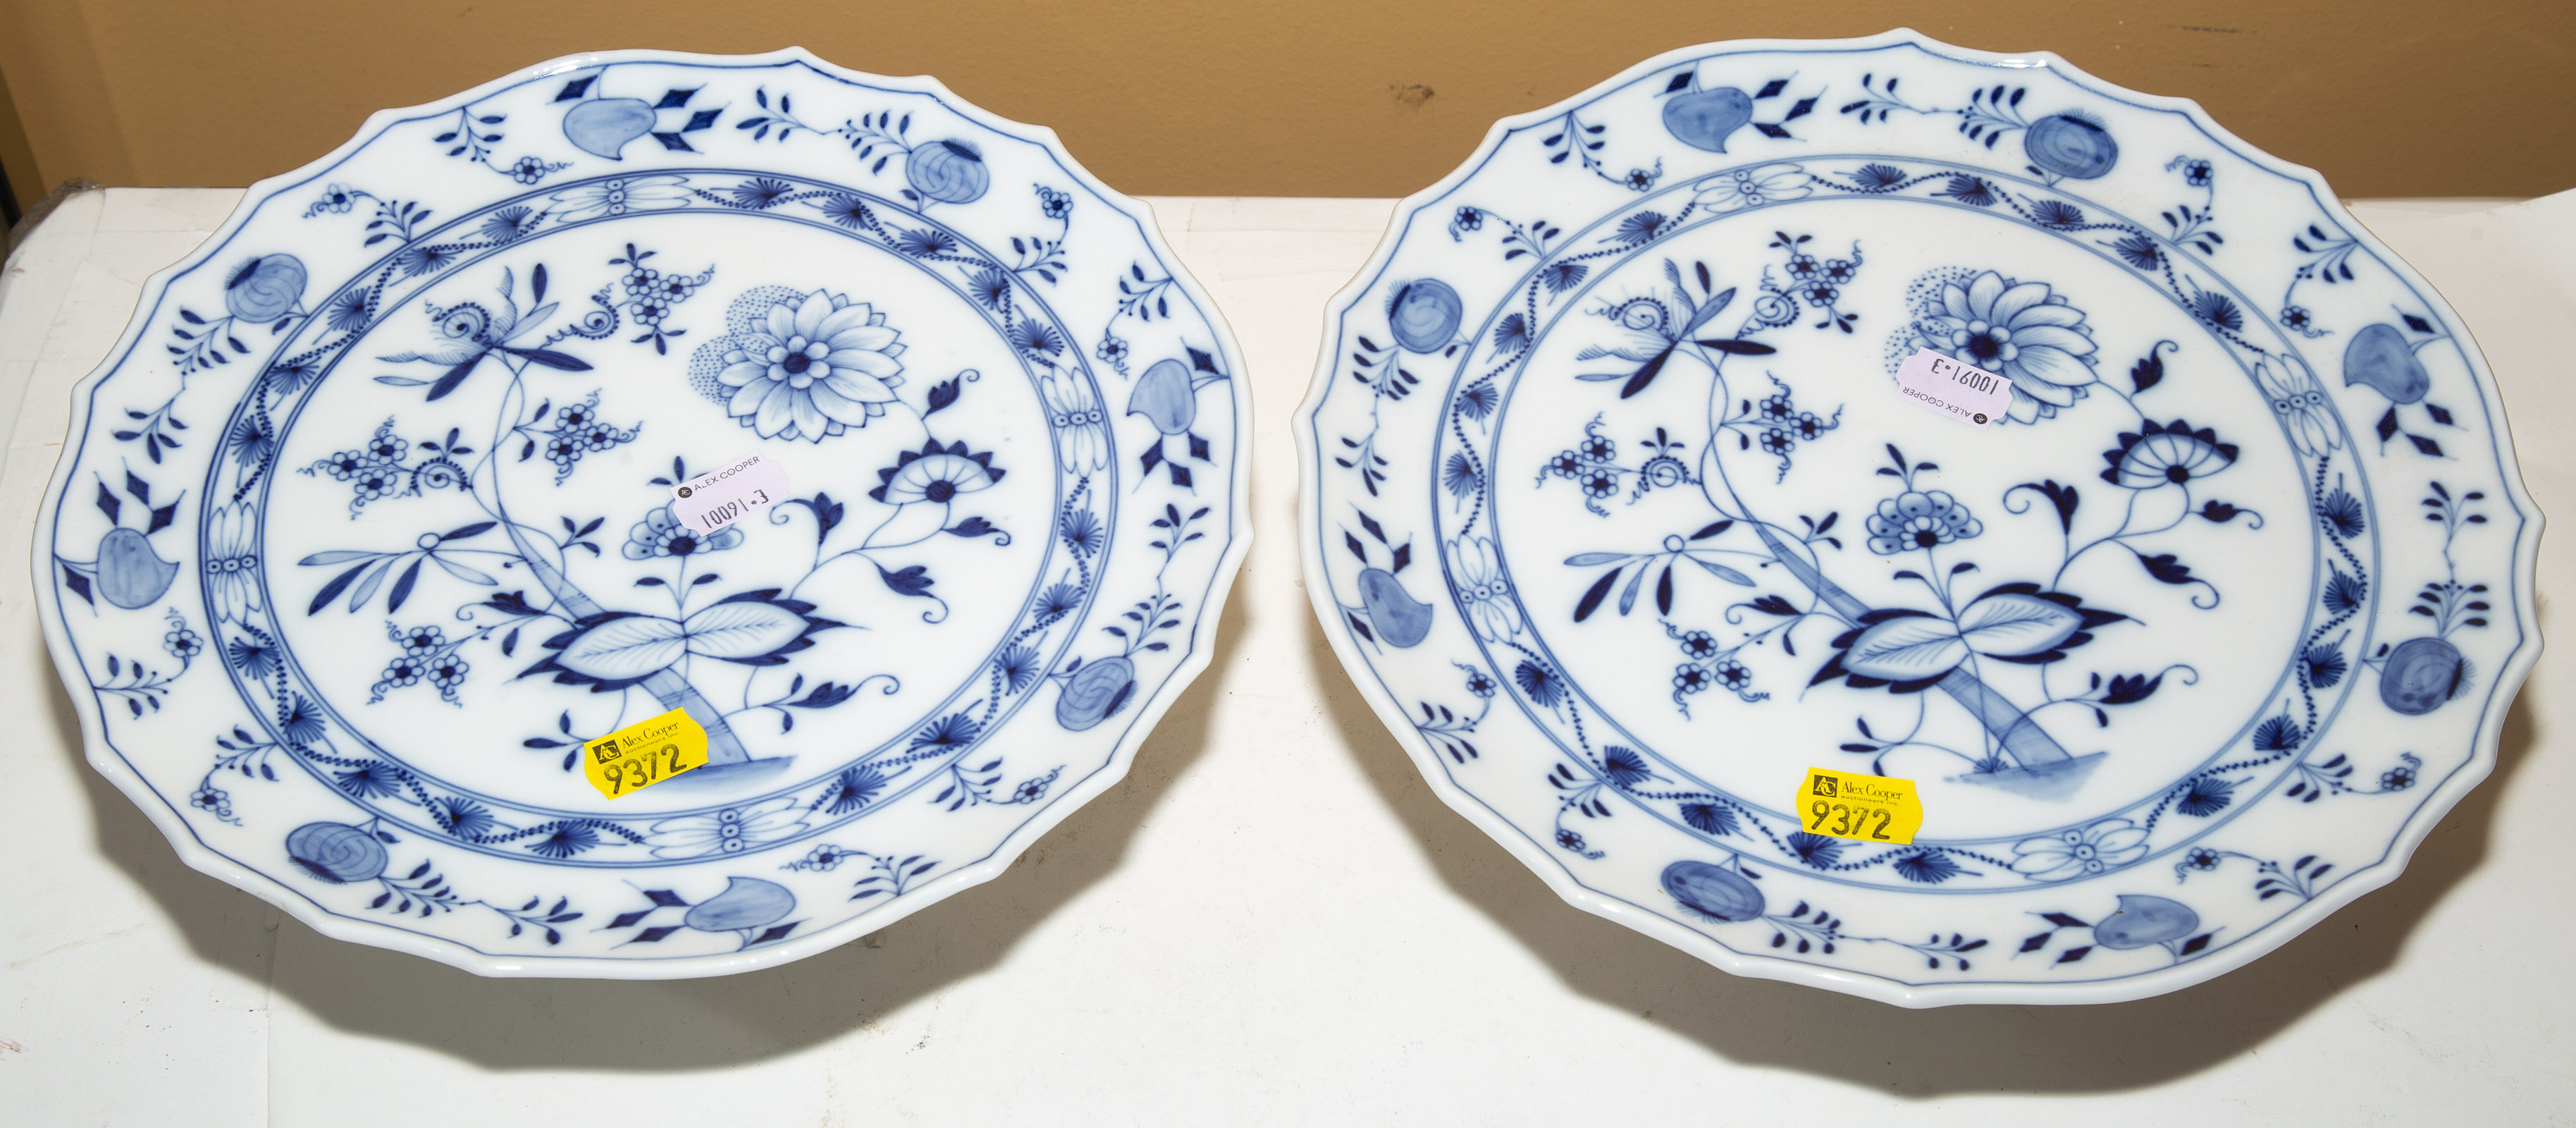 TWO GERMAN BLUE ONION CAKE STANDS Marked